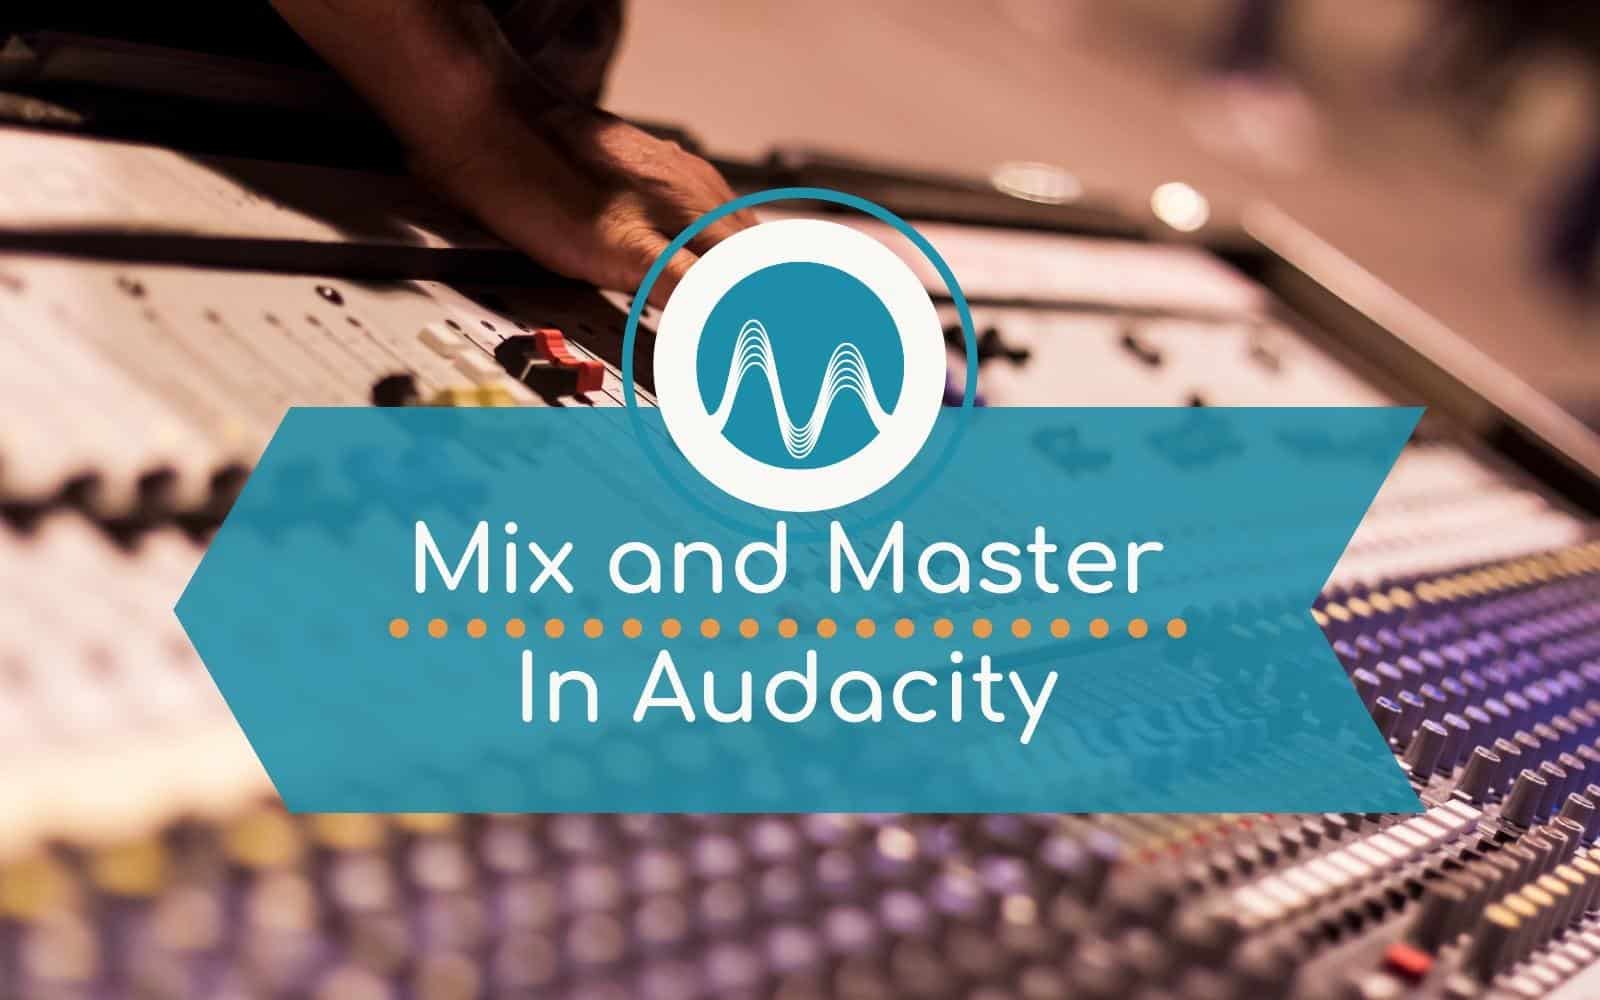 Audacity Mixing And Mastering – How To Make Your Voice Sound Professional In Seconds! Audio Editing Mastering In Audacity Music Radio Creative